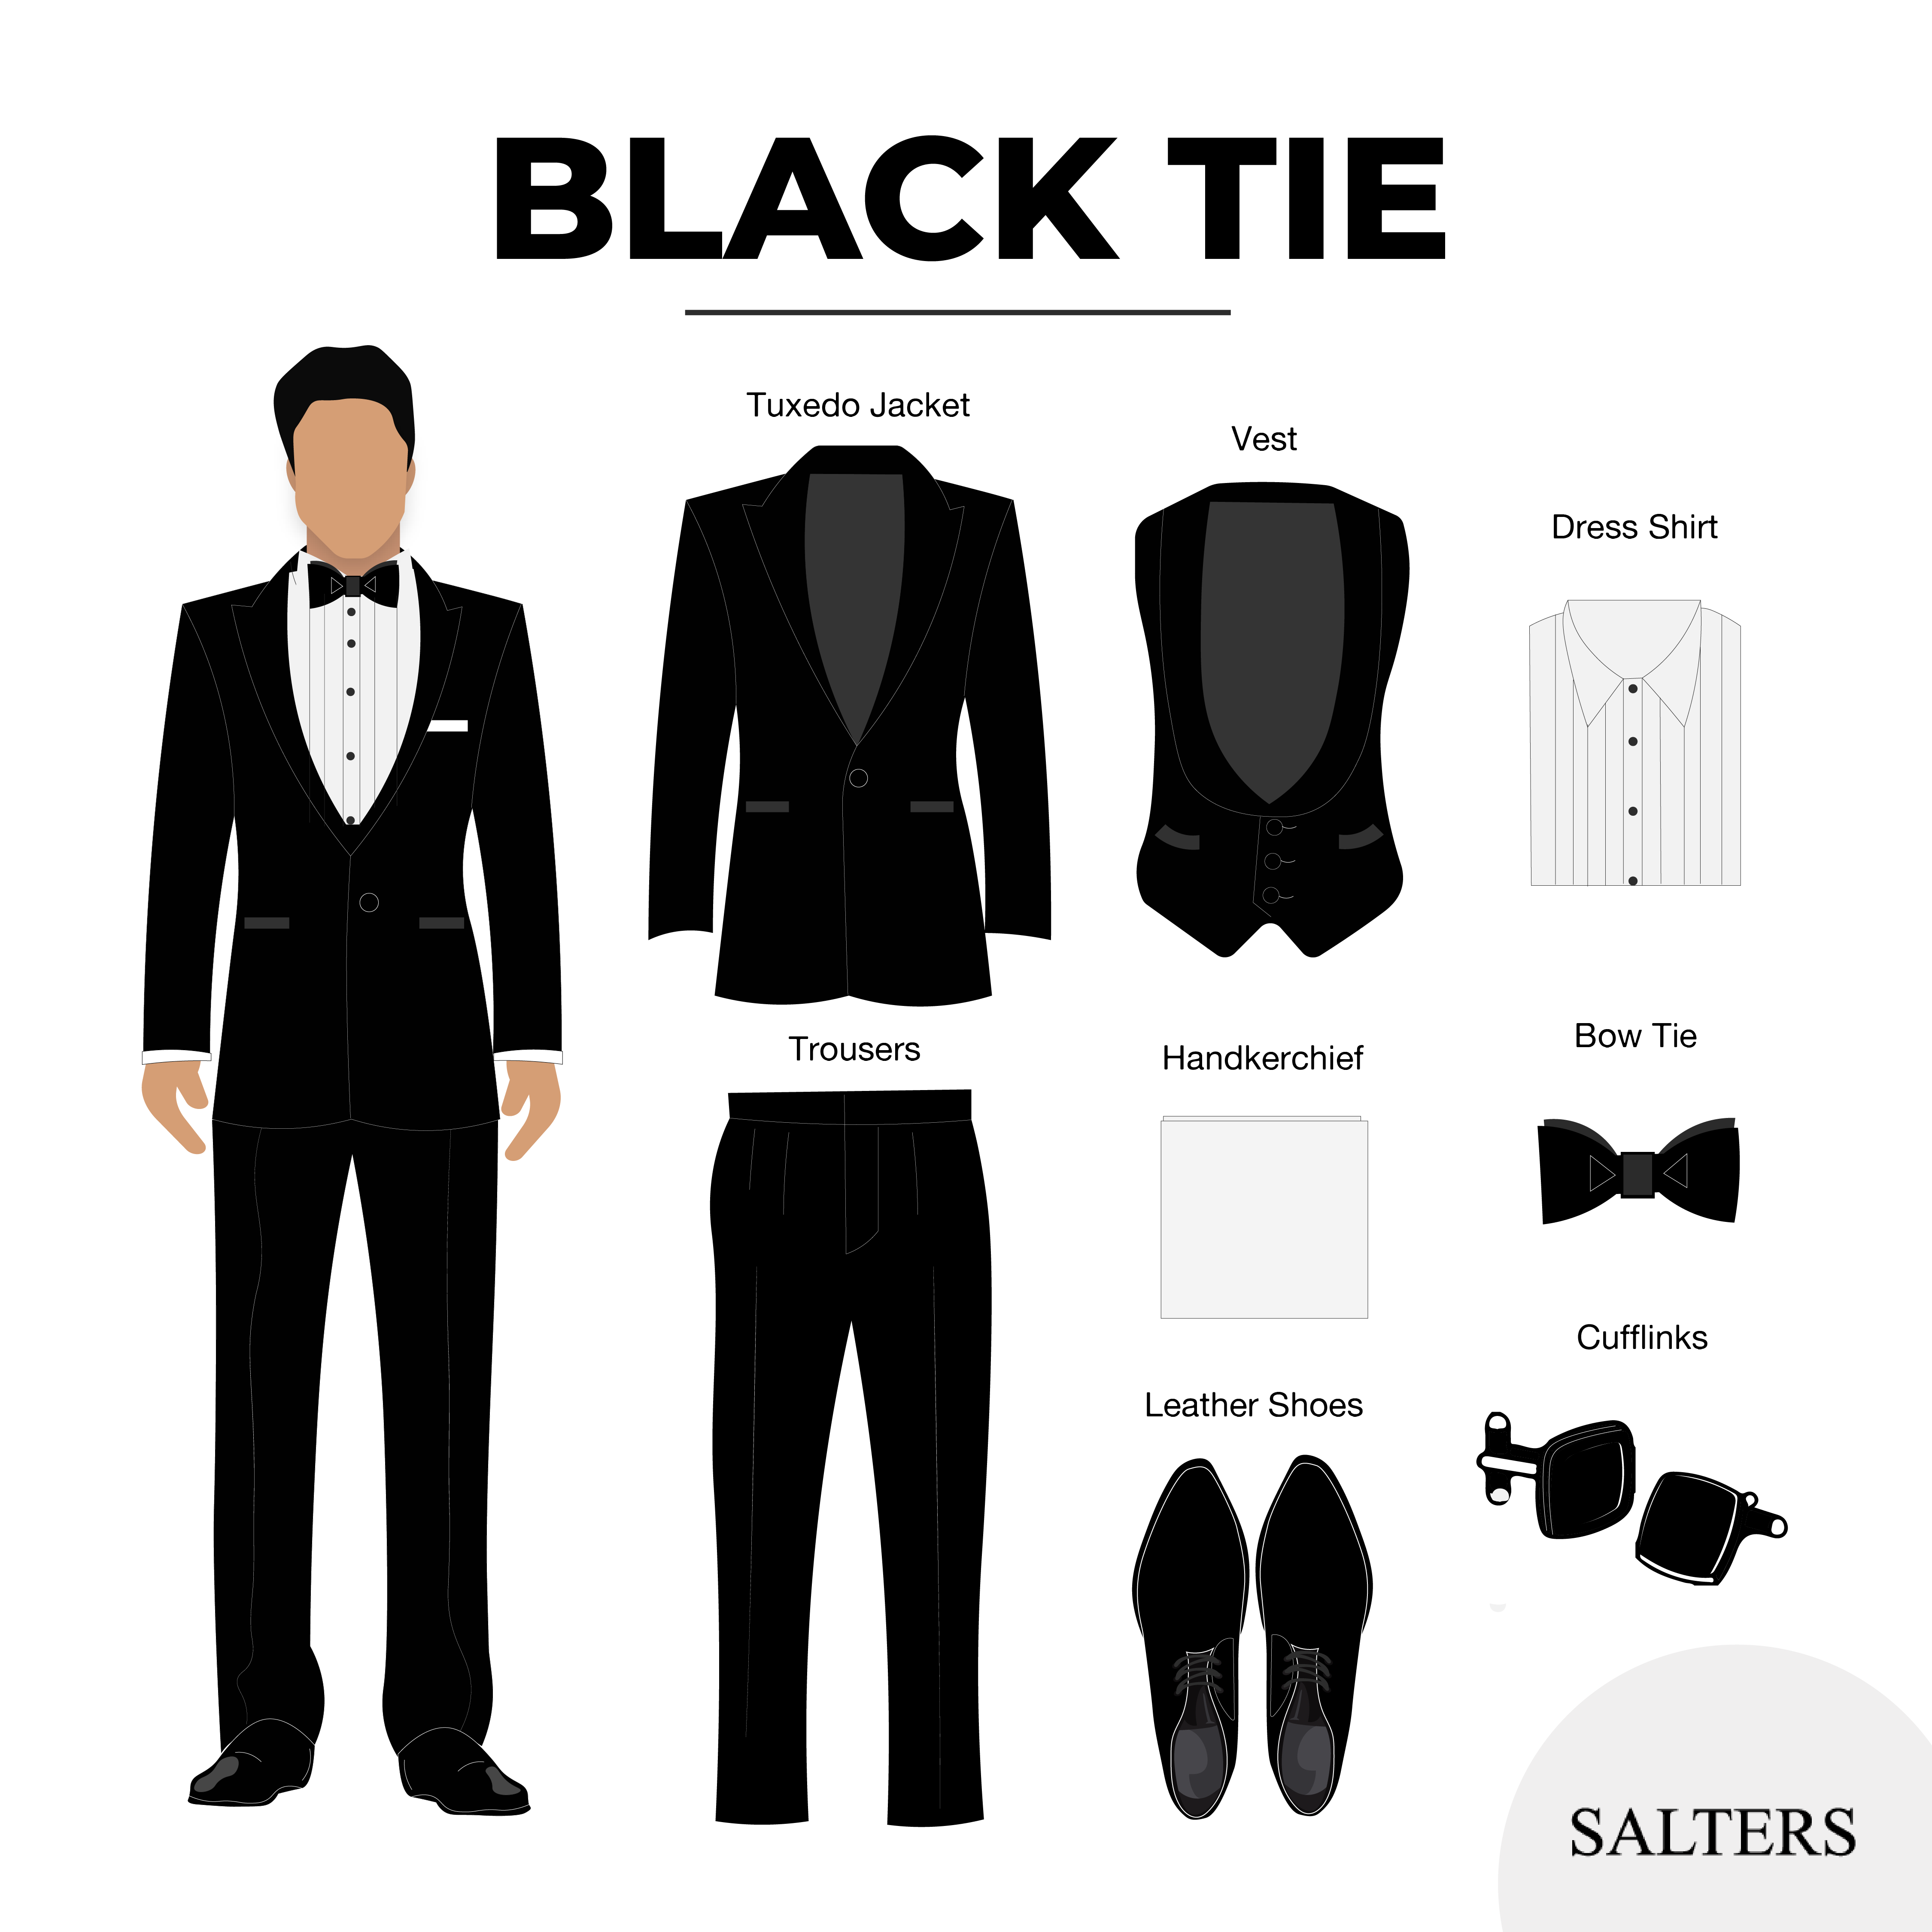 The Salters Guide to Dress Codes for Men